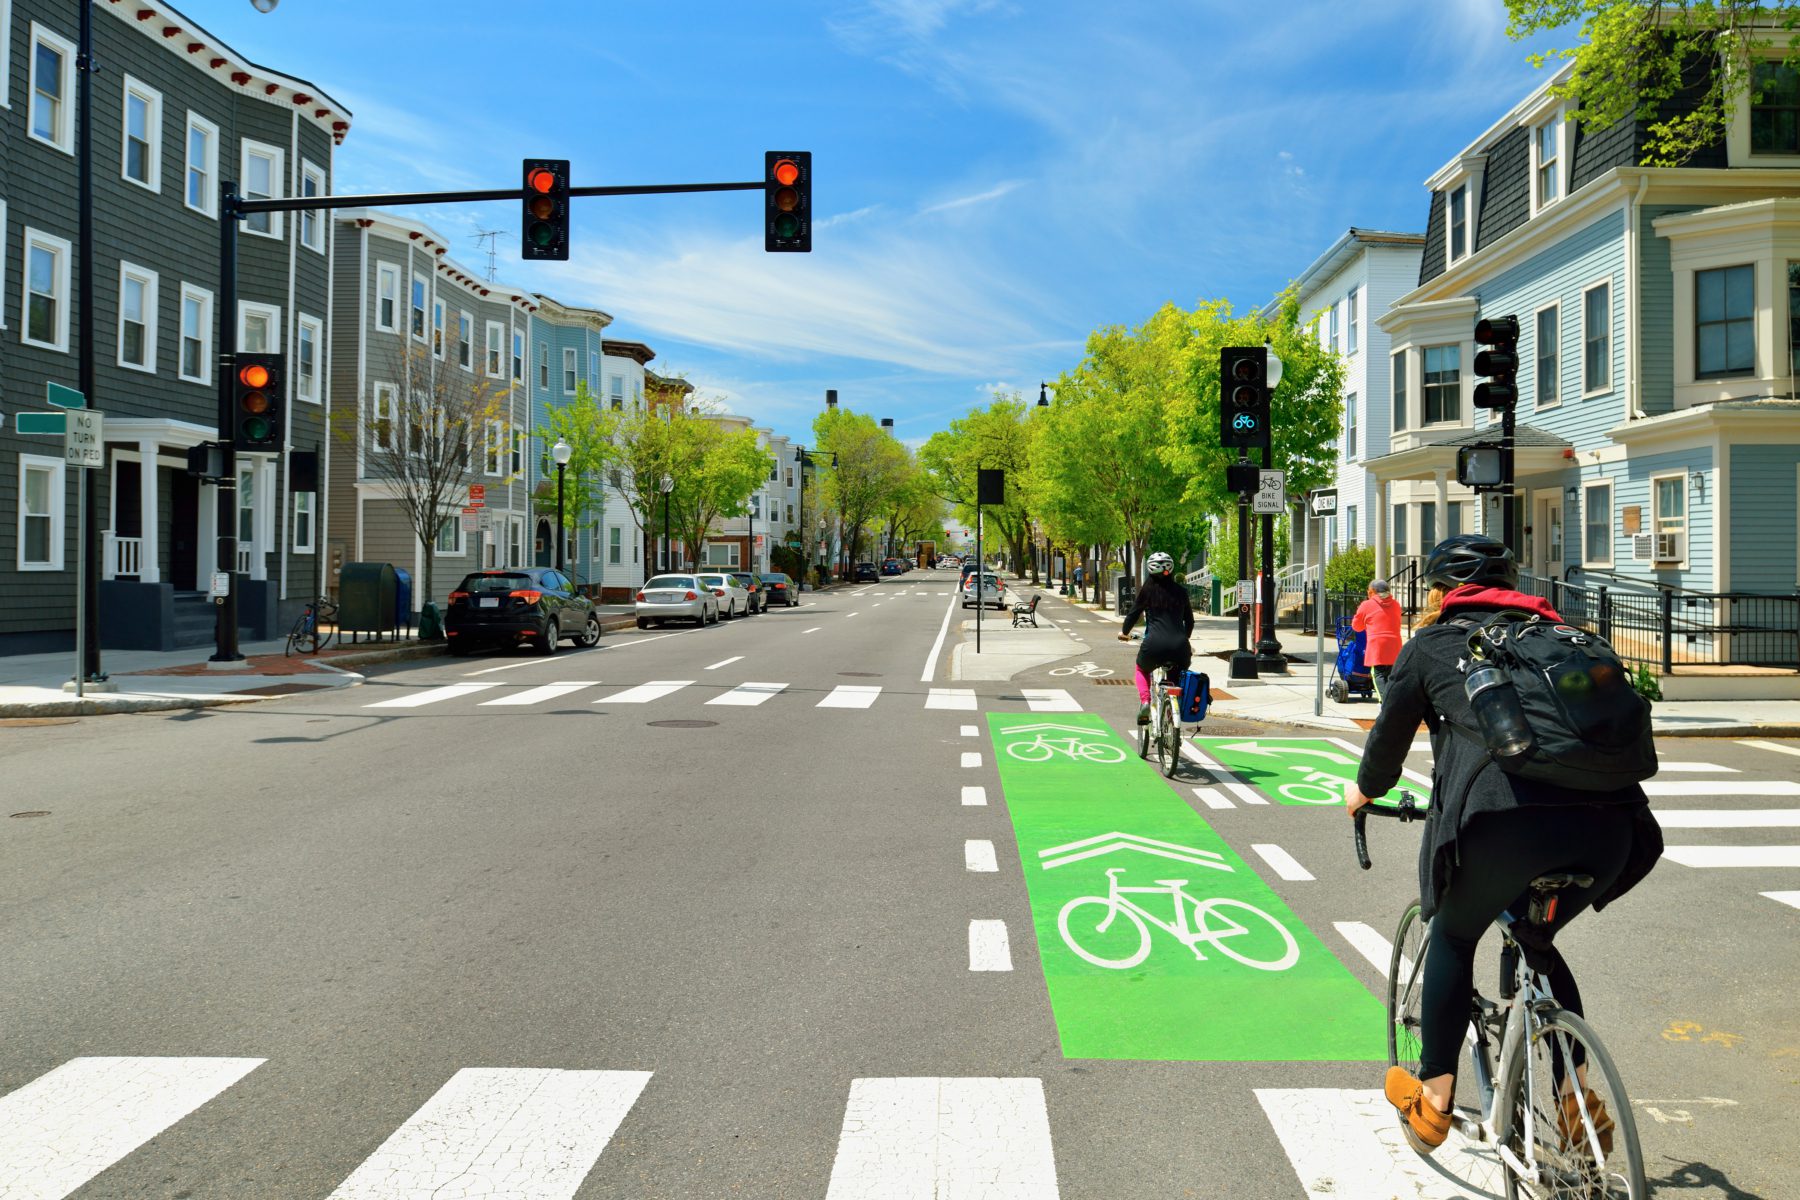 Introducing the Complete Streets Policy Action Guide